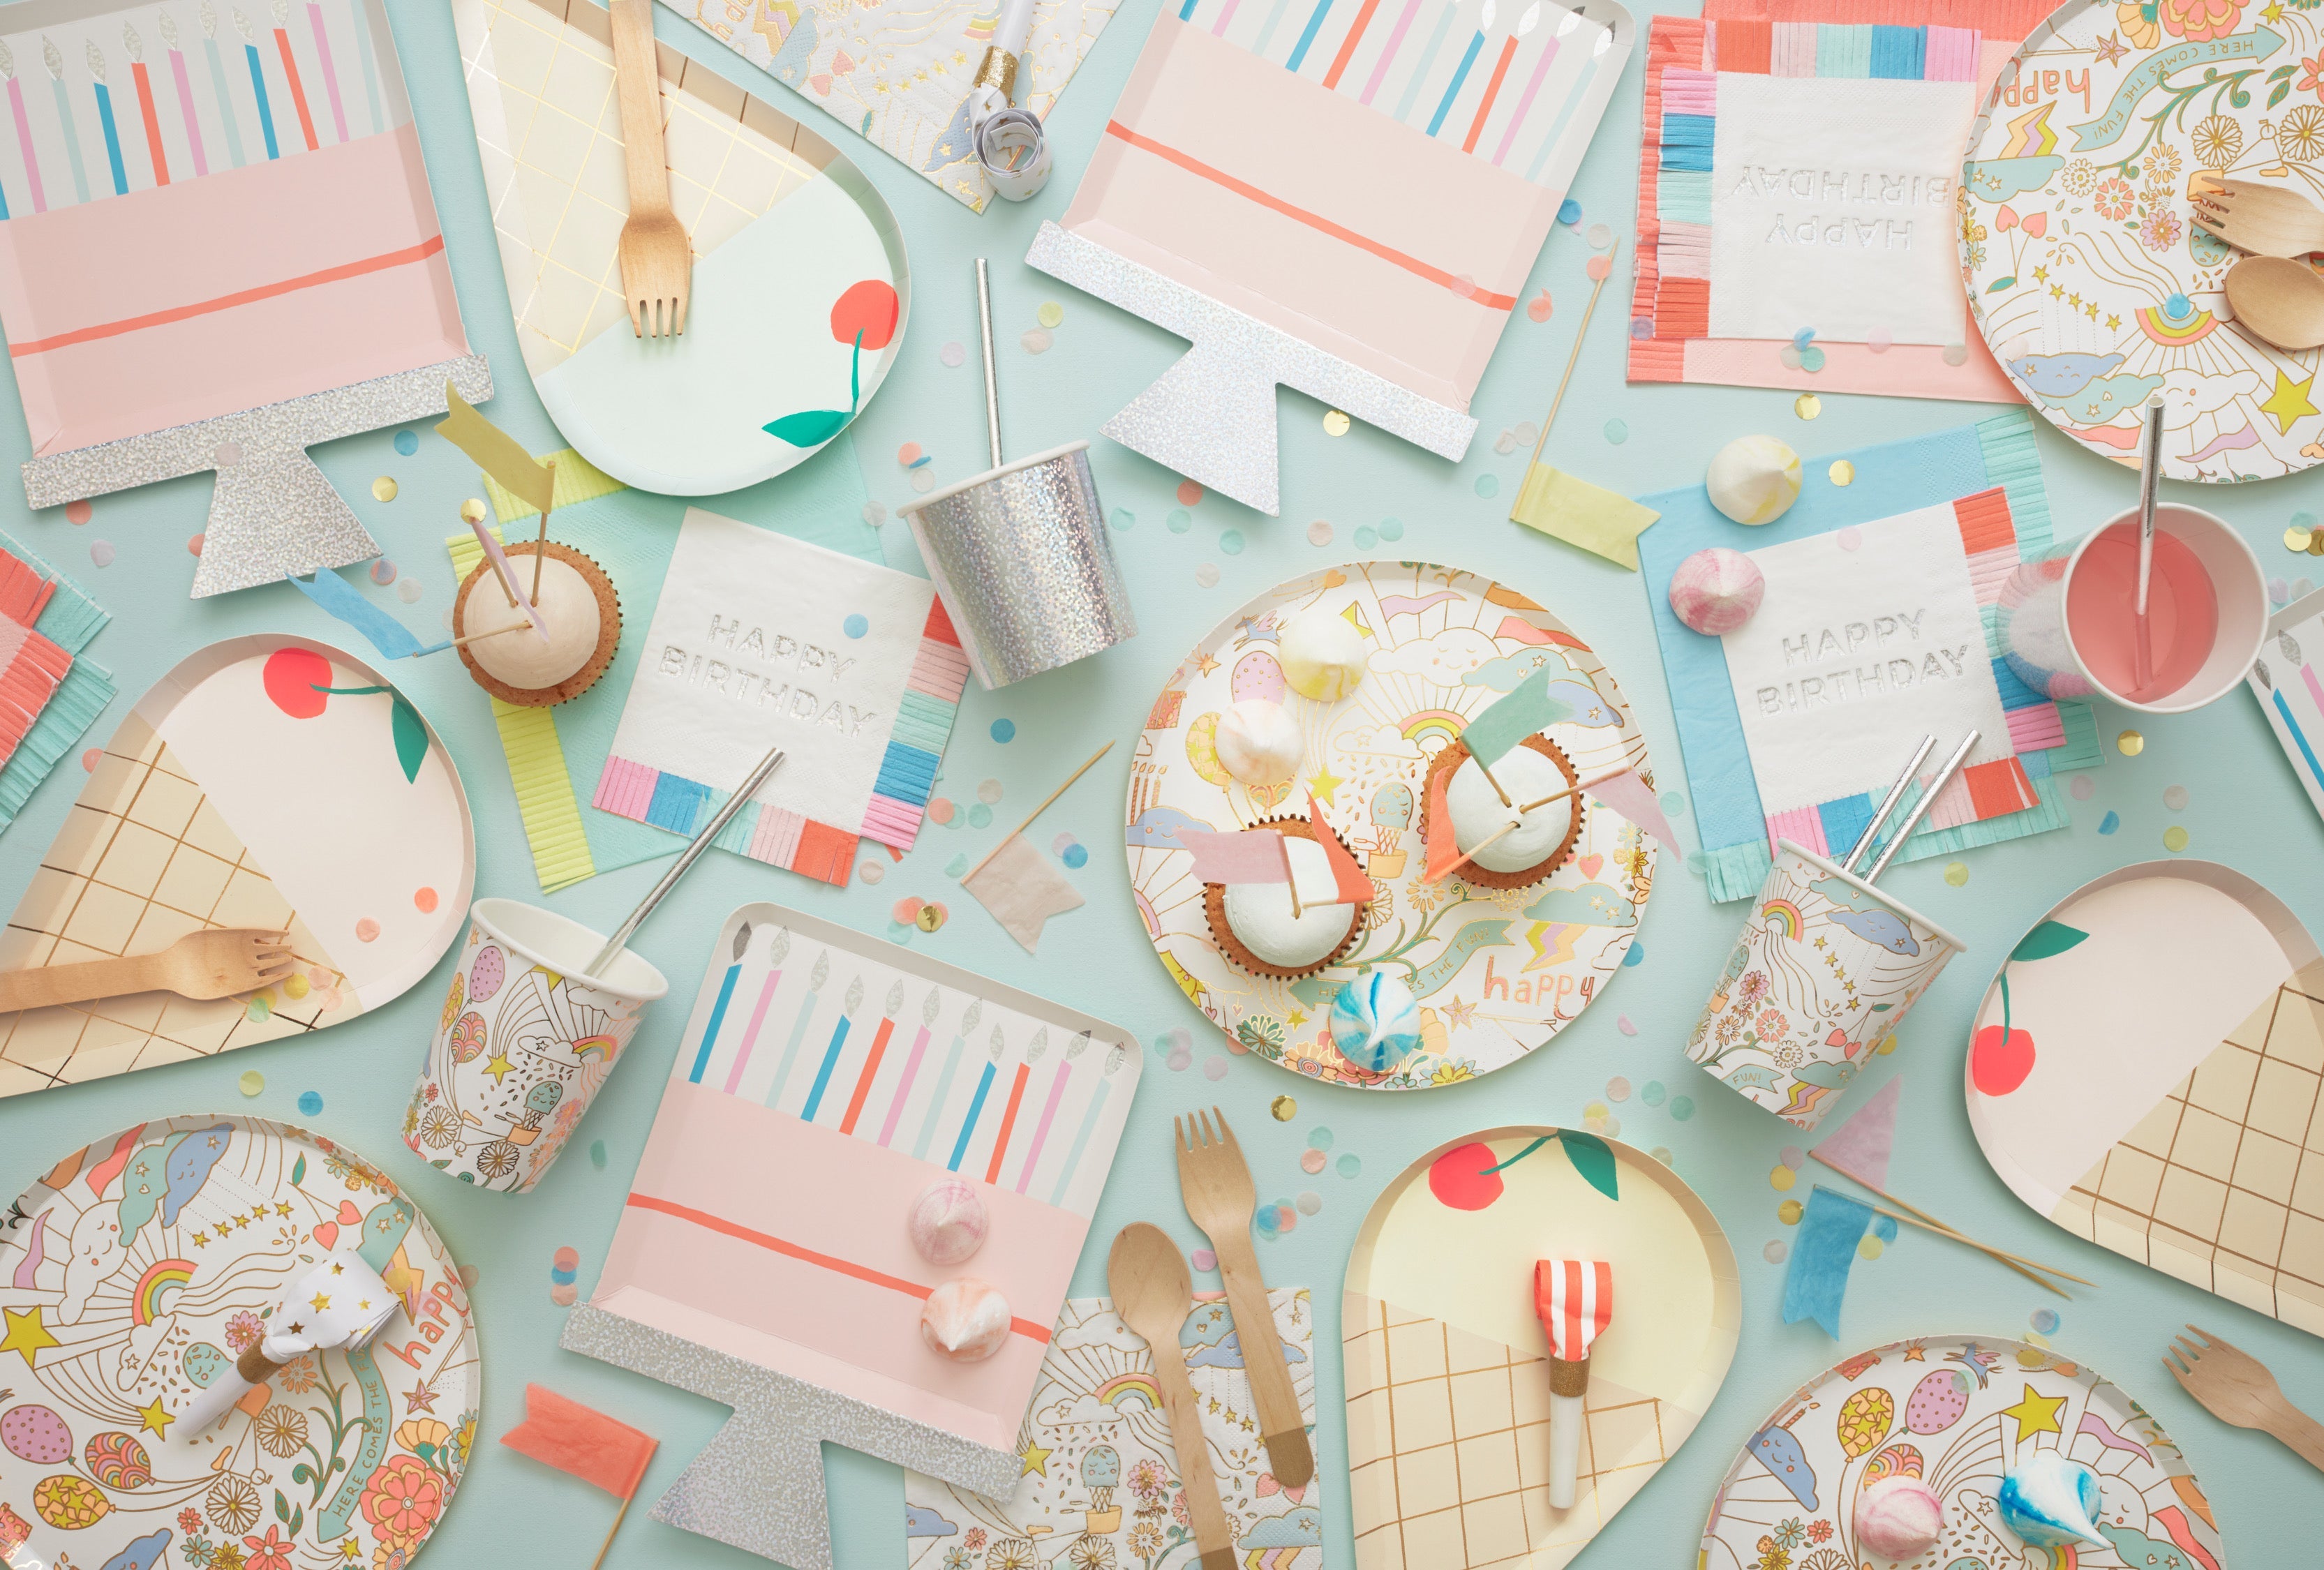 Look no further for adorable ice cream decorations, tableware and banners, because we have those too! 